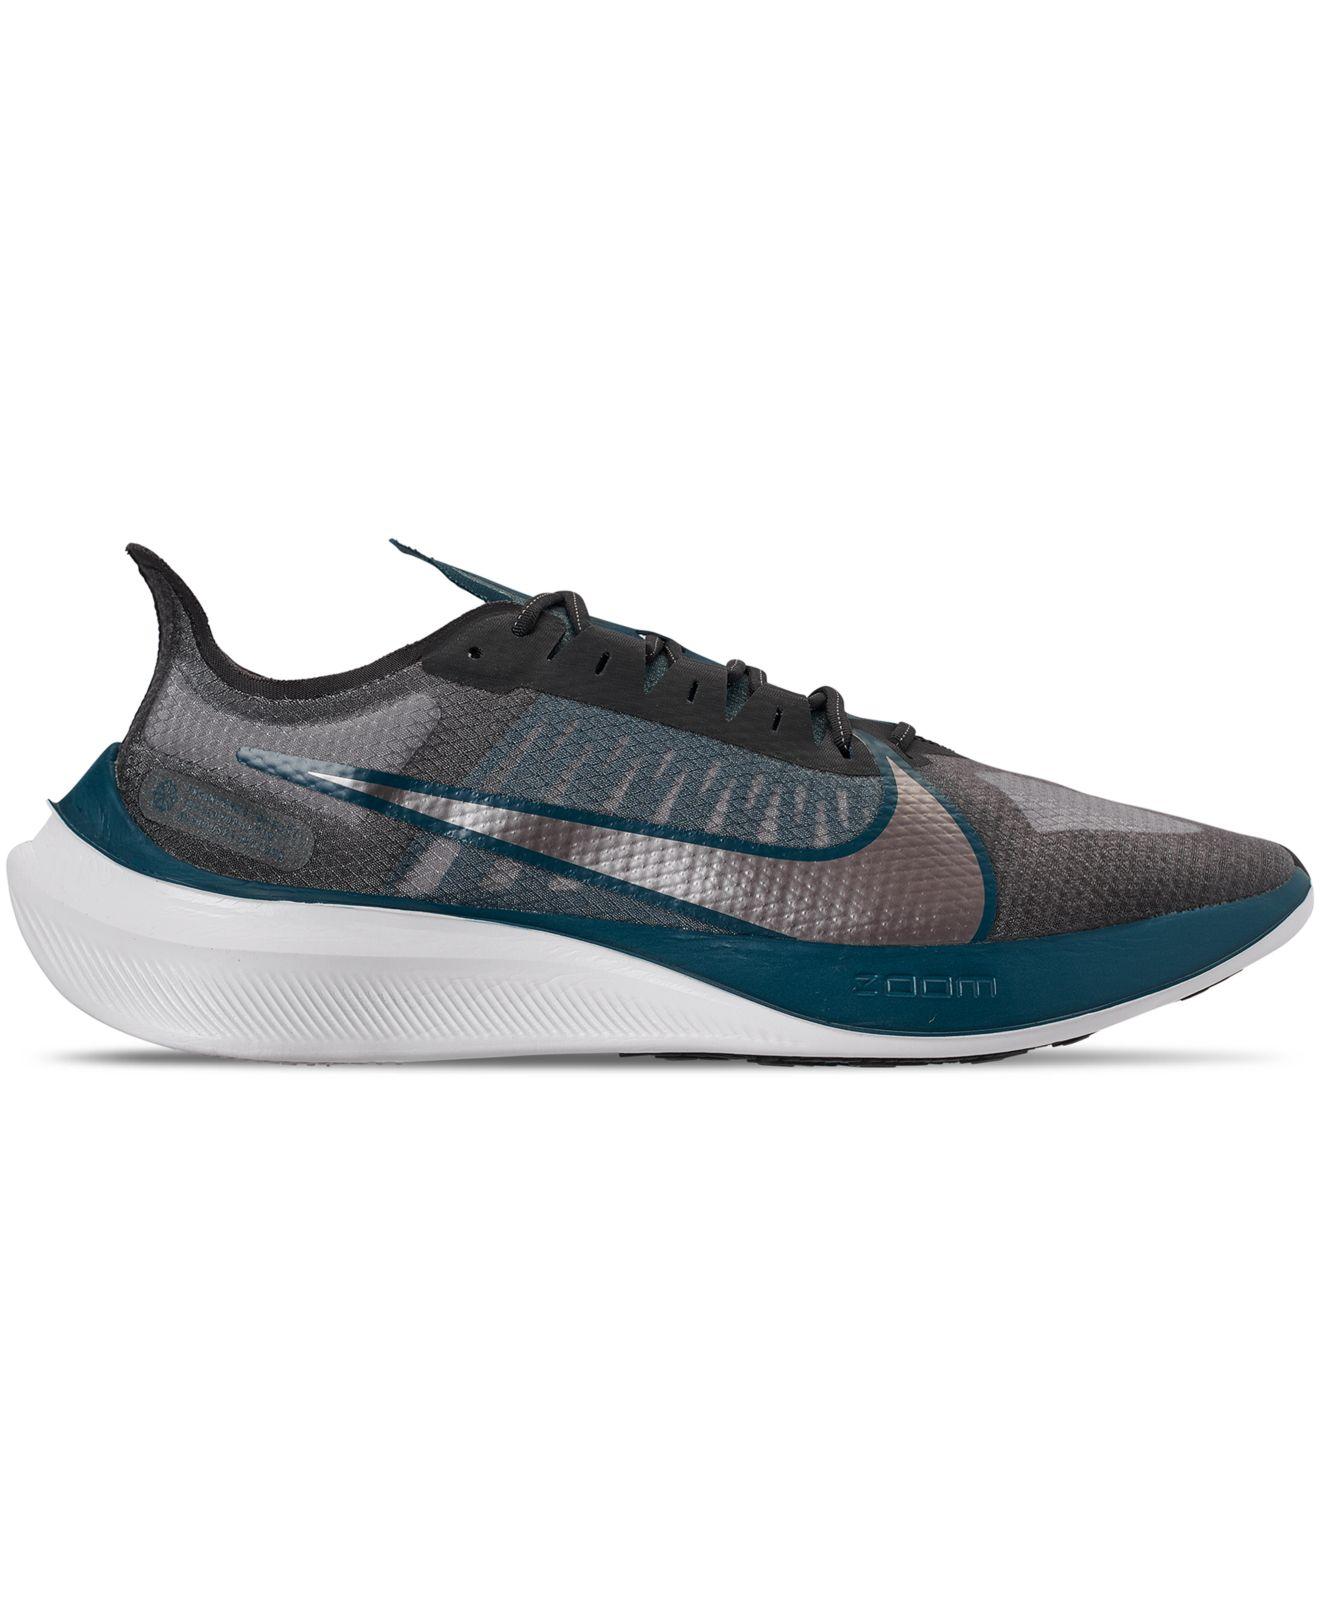 Nike Rubber Zoom Gravity for Men - Save 